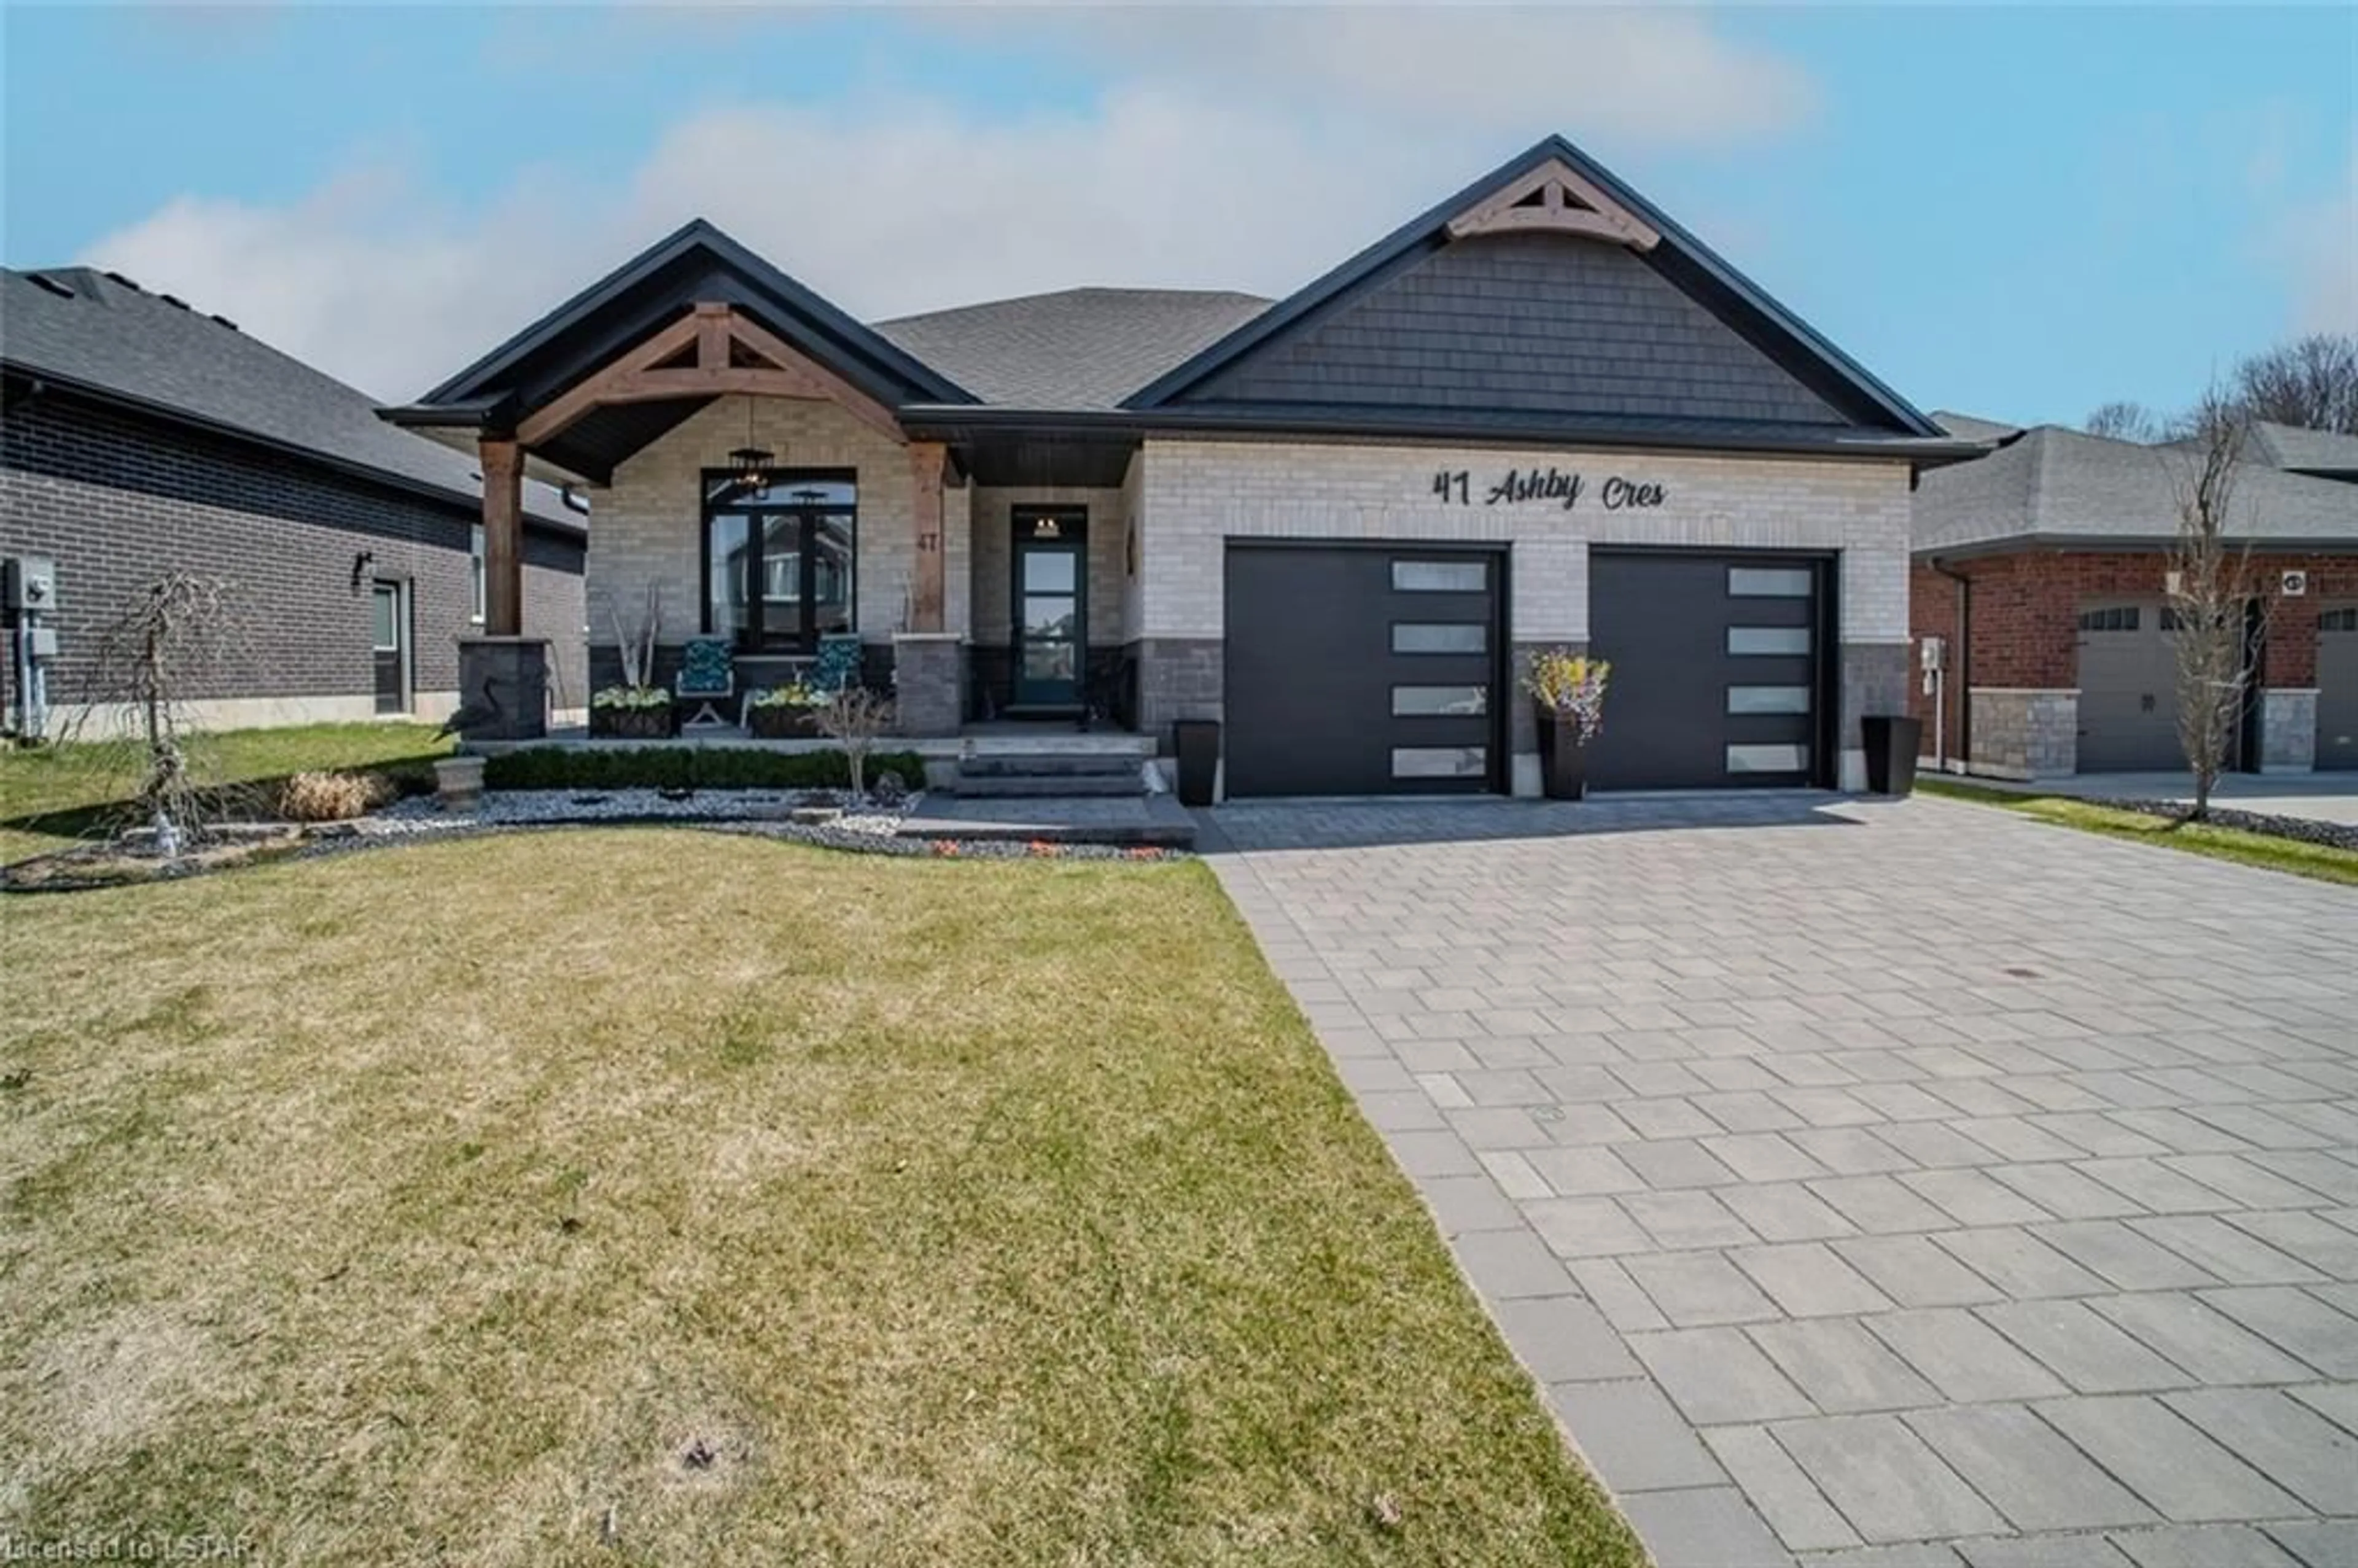 Frontside or backside of a home for 47 Ashby Cres, Strathroy Ontario N7G 0C9